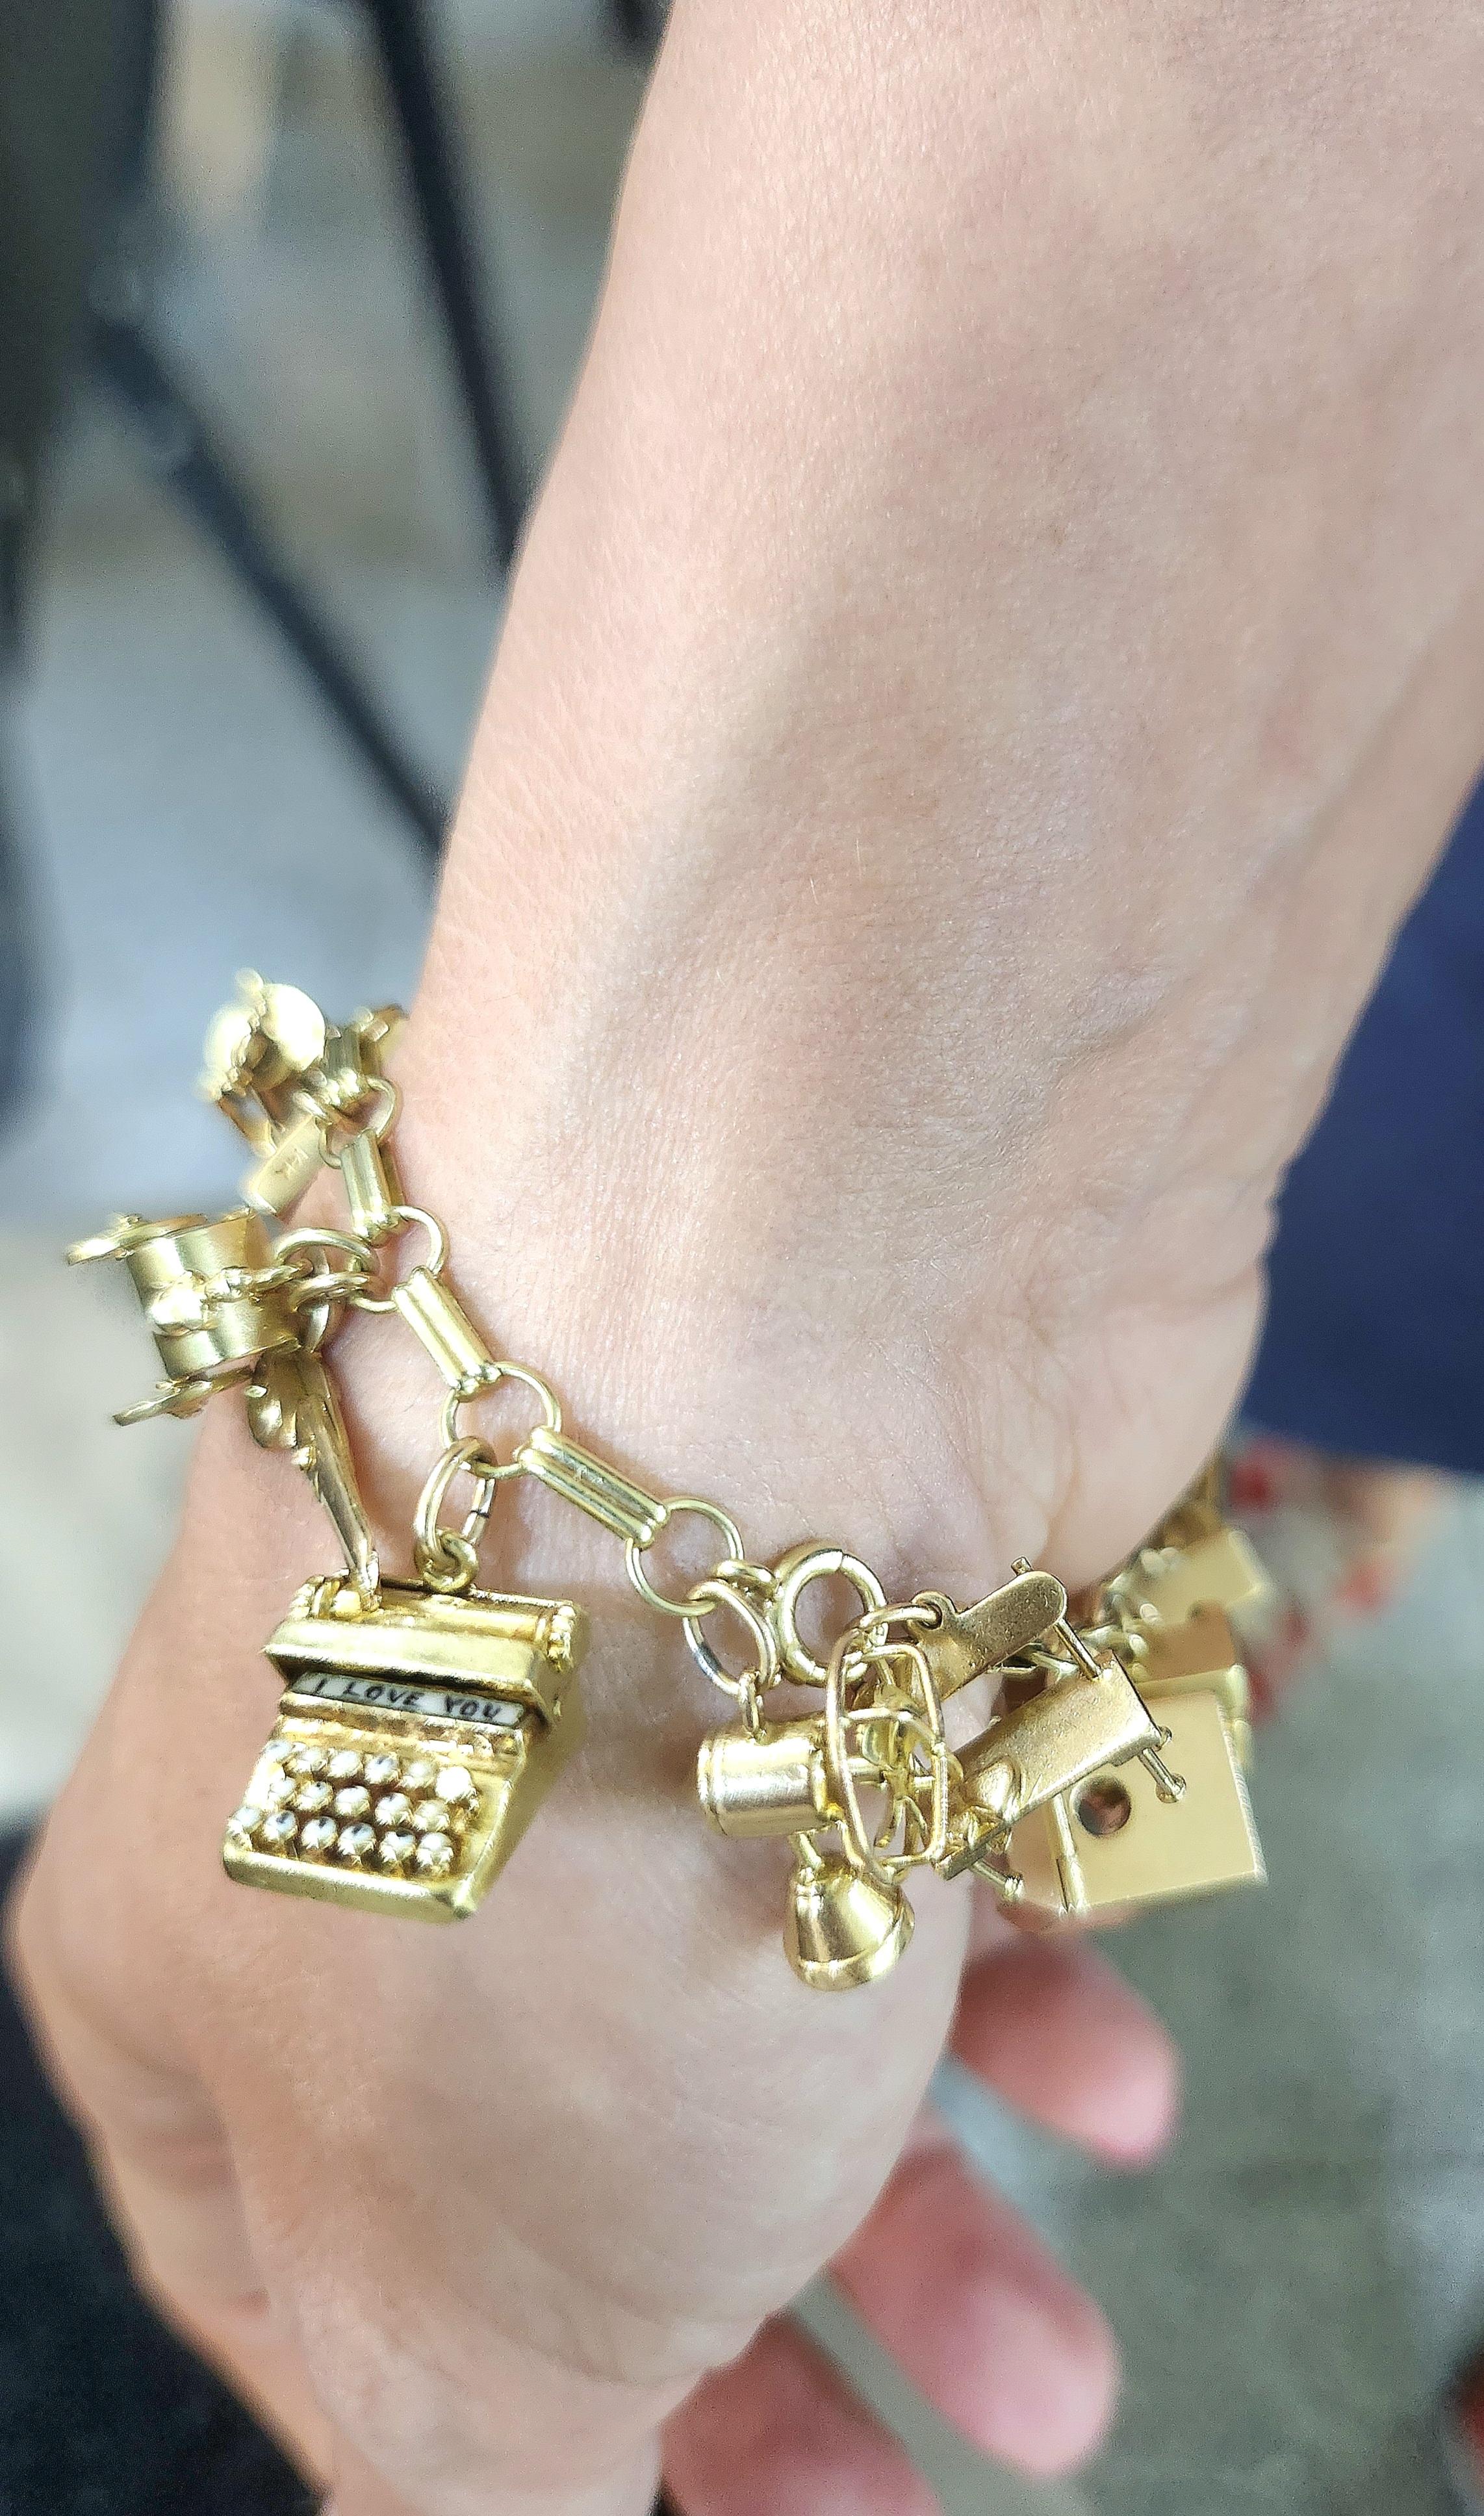 Pre-Owned 9ct Gold Charm Bracelets | 9ct Gold Bracelet with Gold Charms |  Second Hand Gold Bracelets